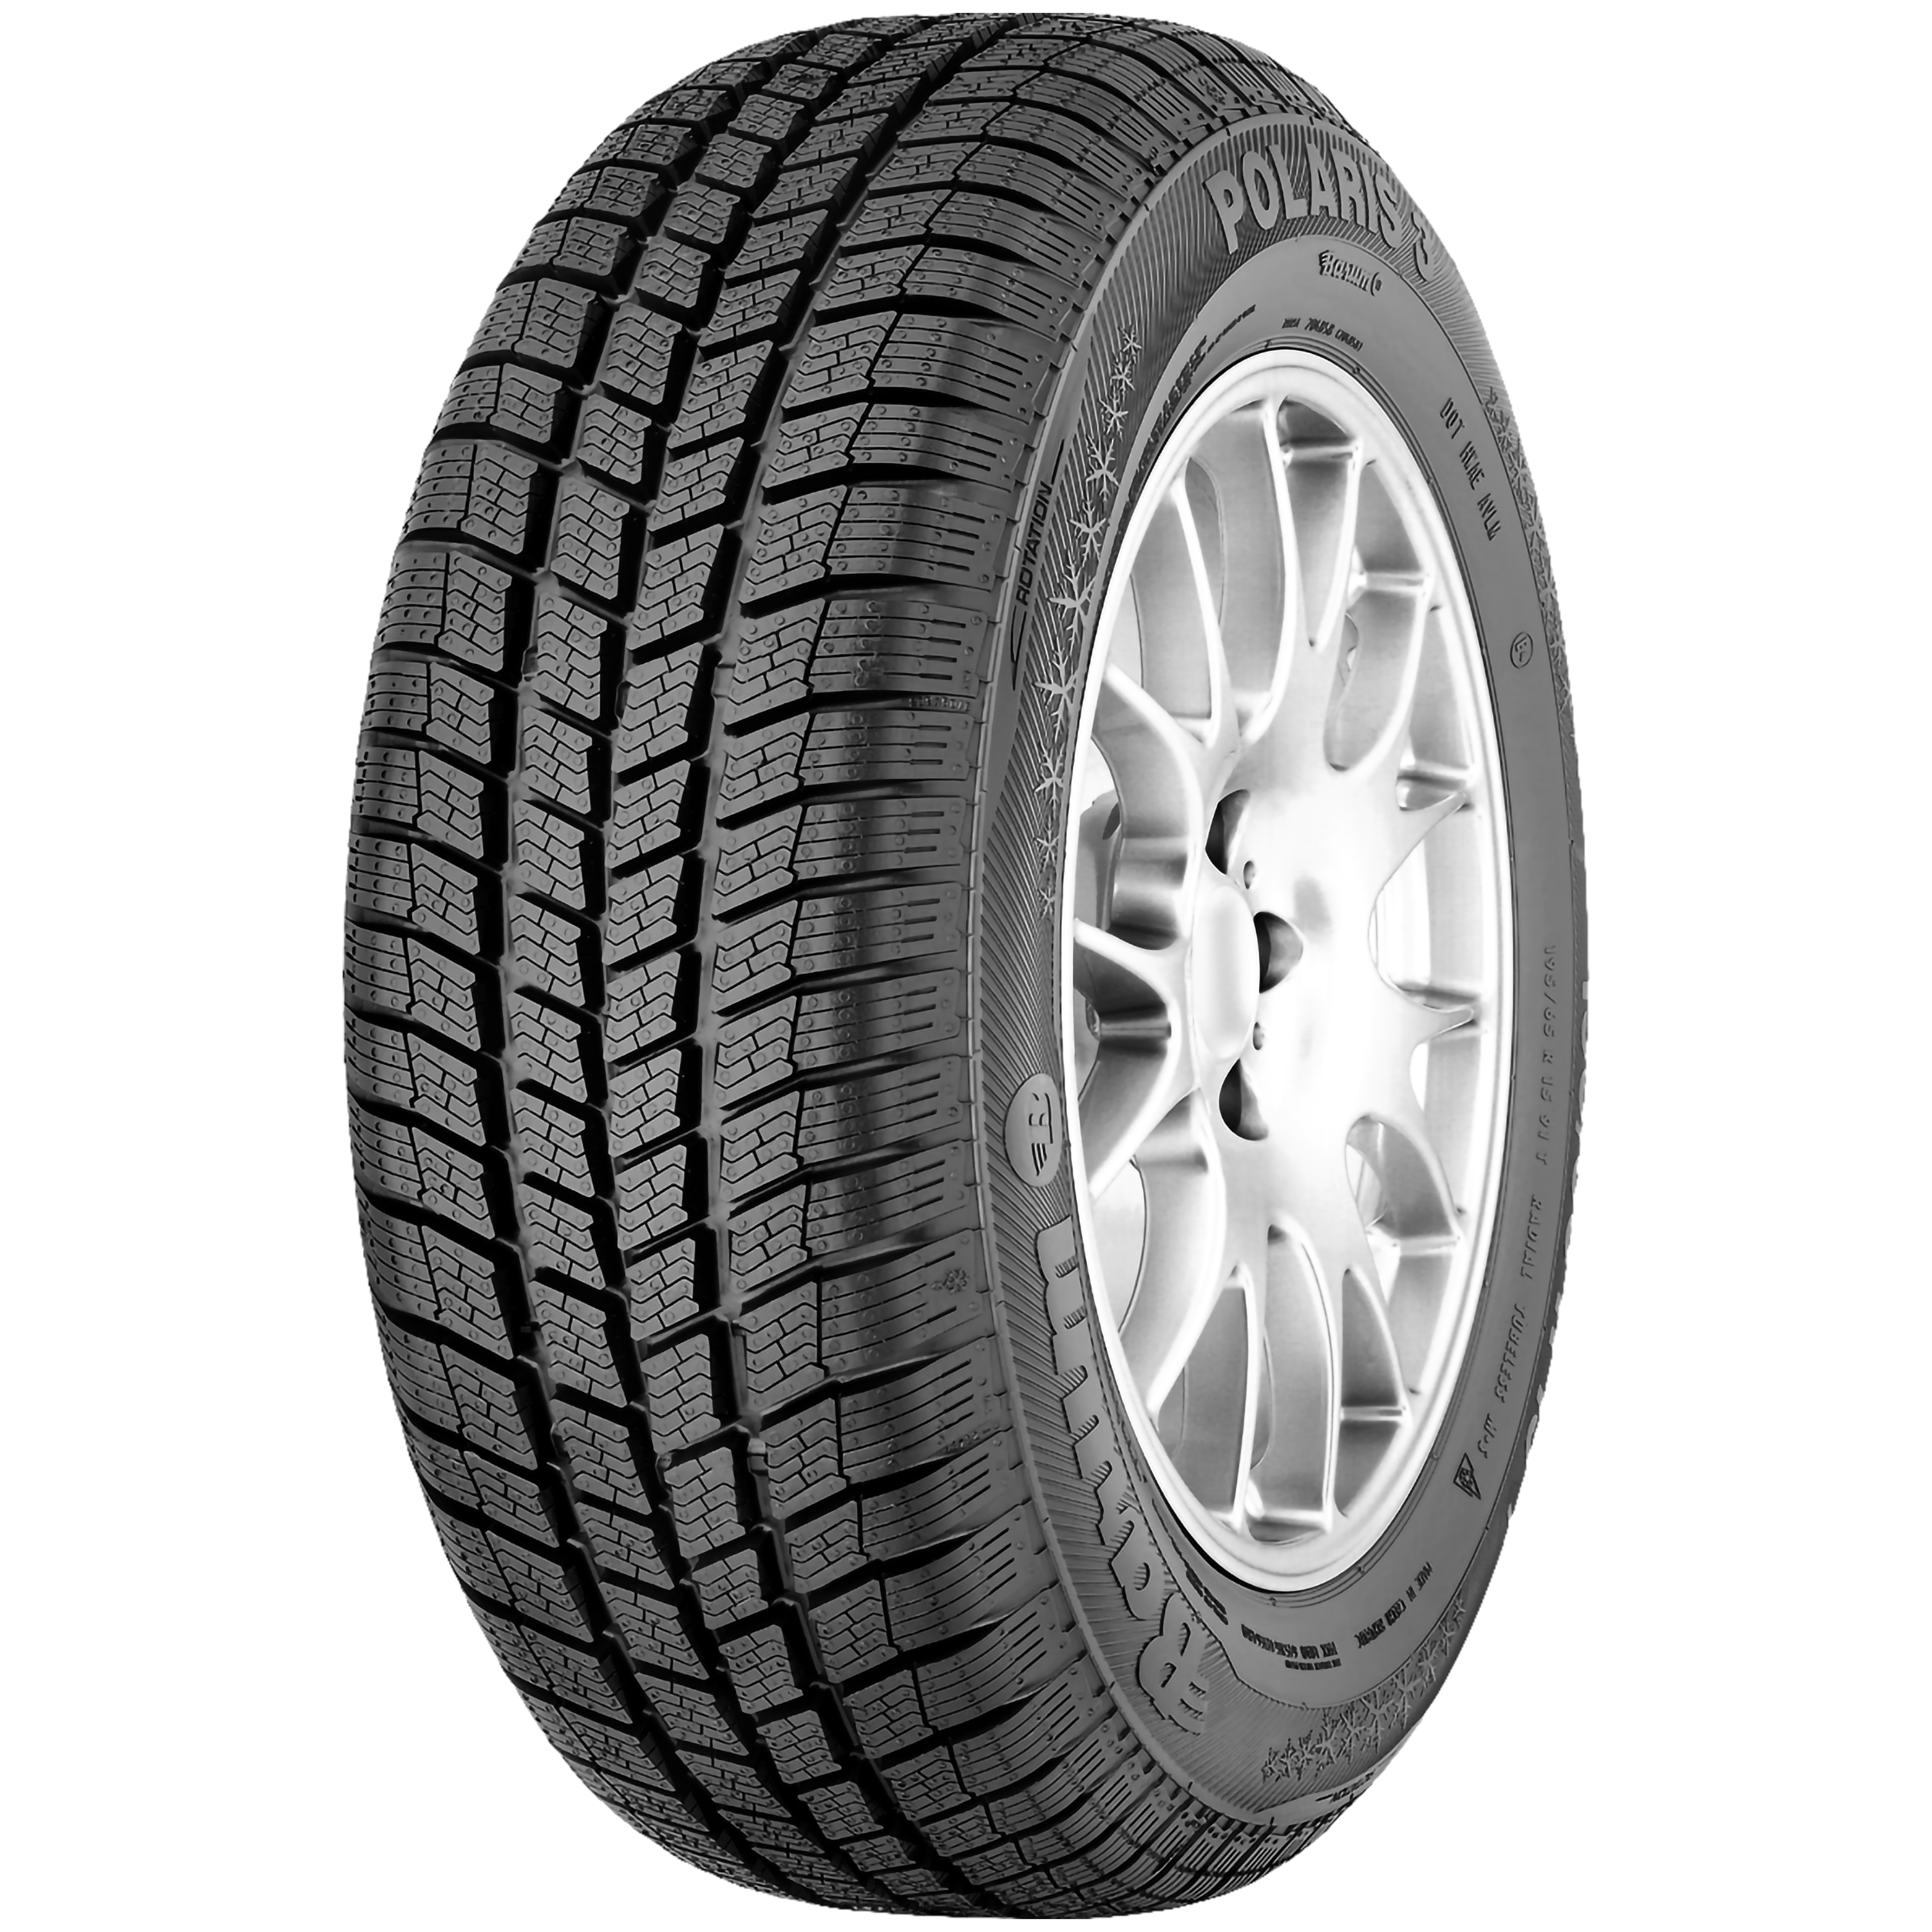 - with 3 Polaris Barum winter resistance consumption tyre | rolling low car & Barum fuel The